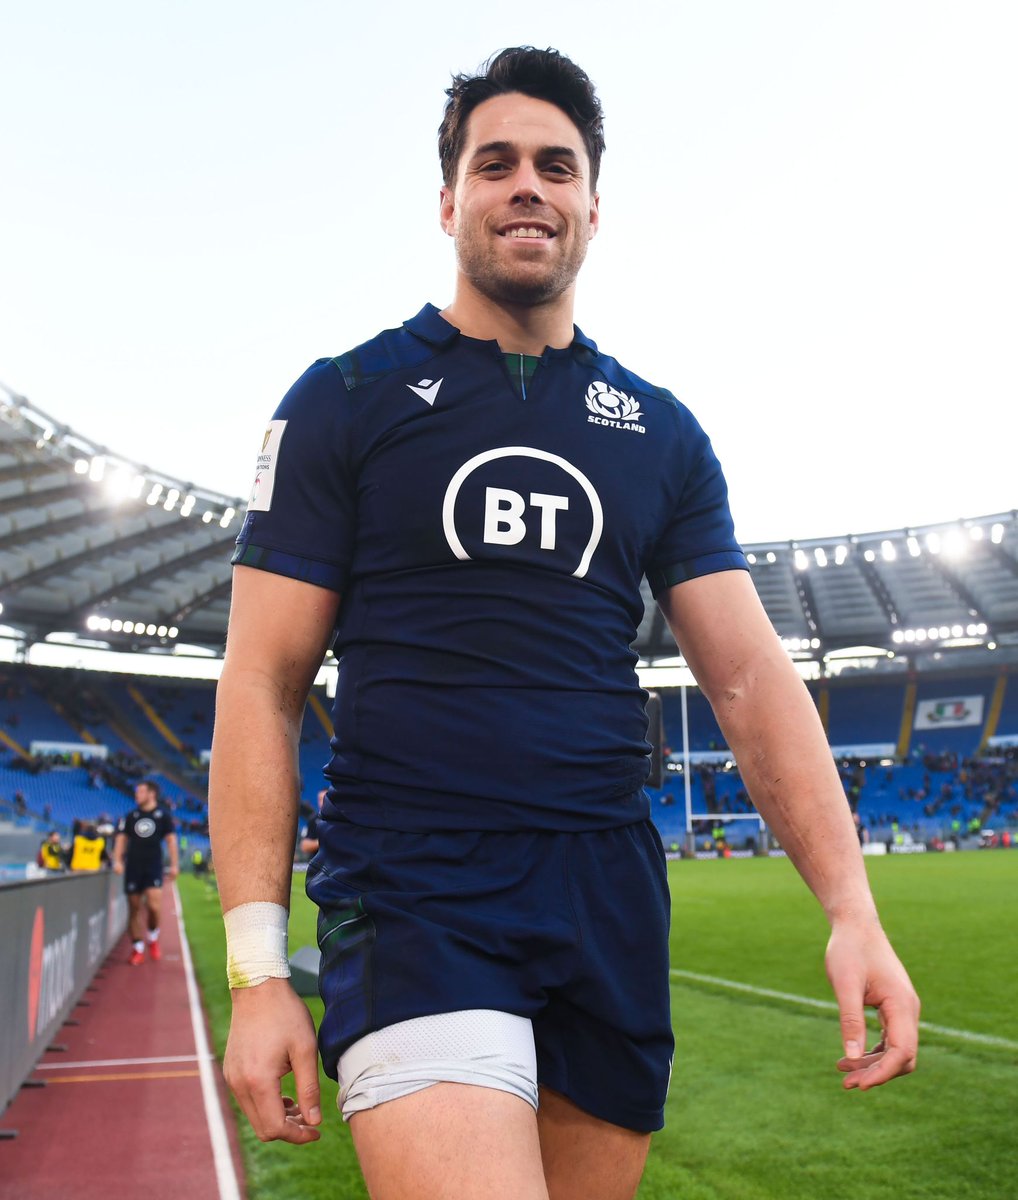 All the best to Sean Maitland on his retirement from rugby at the end of the season. He played 54 times for Scotland, including two Rugby World Cups, scoring 15 tries and being selected for @lionsofficial. #AsOne